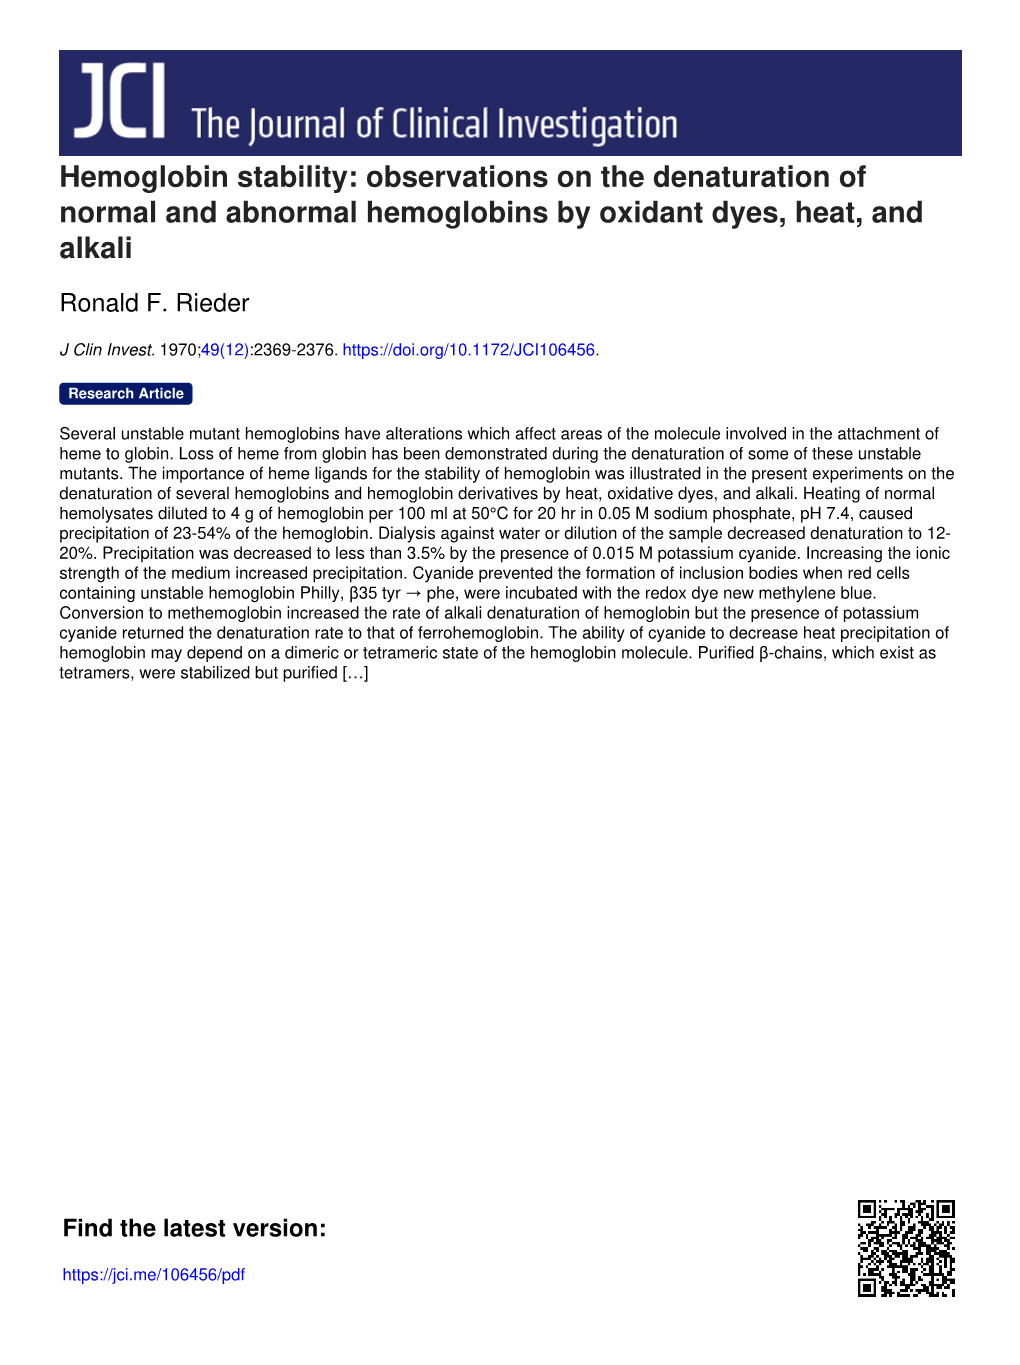 Hemoglobin Stability: Observations on the Denaturation of Normal and Abnormal Hemoglobins by Oxidant Dyes, Heat, and Alkali